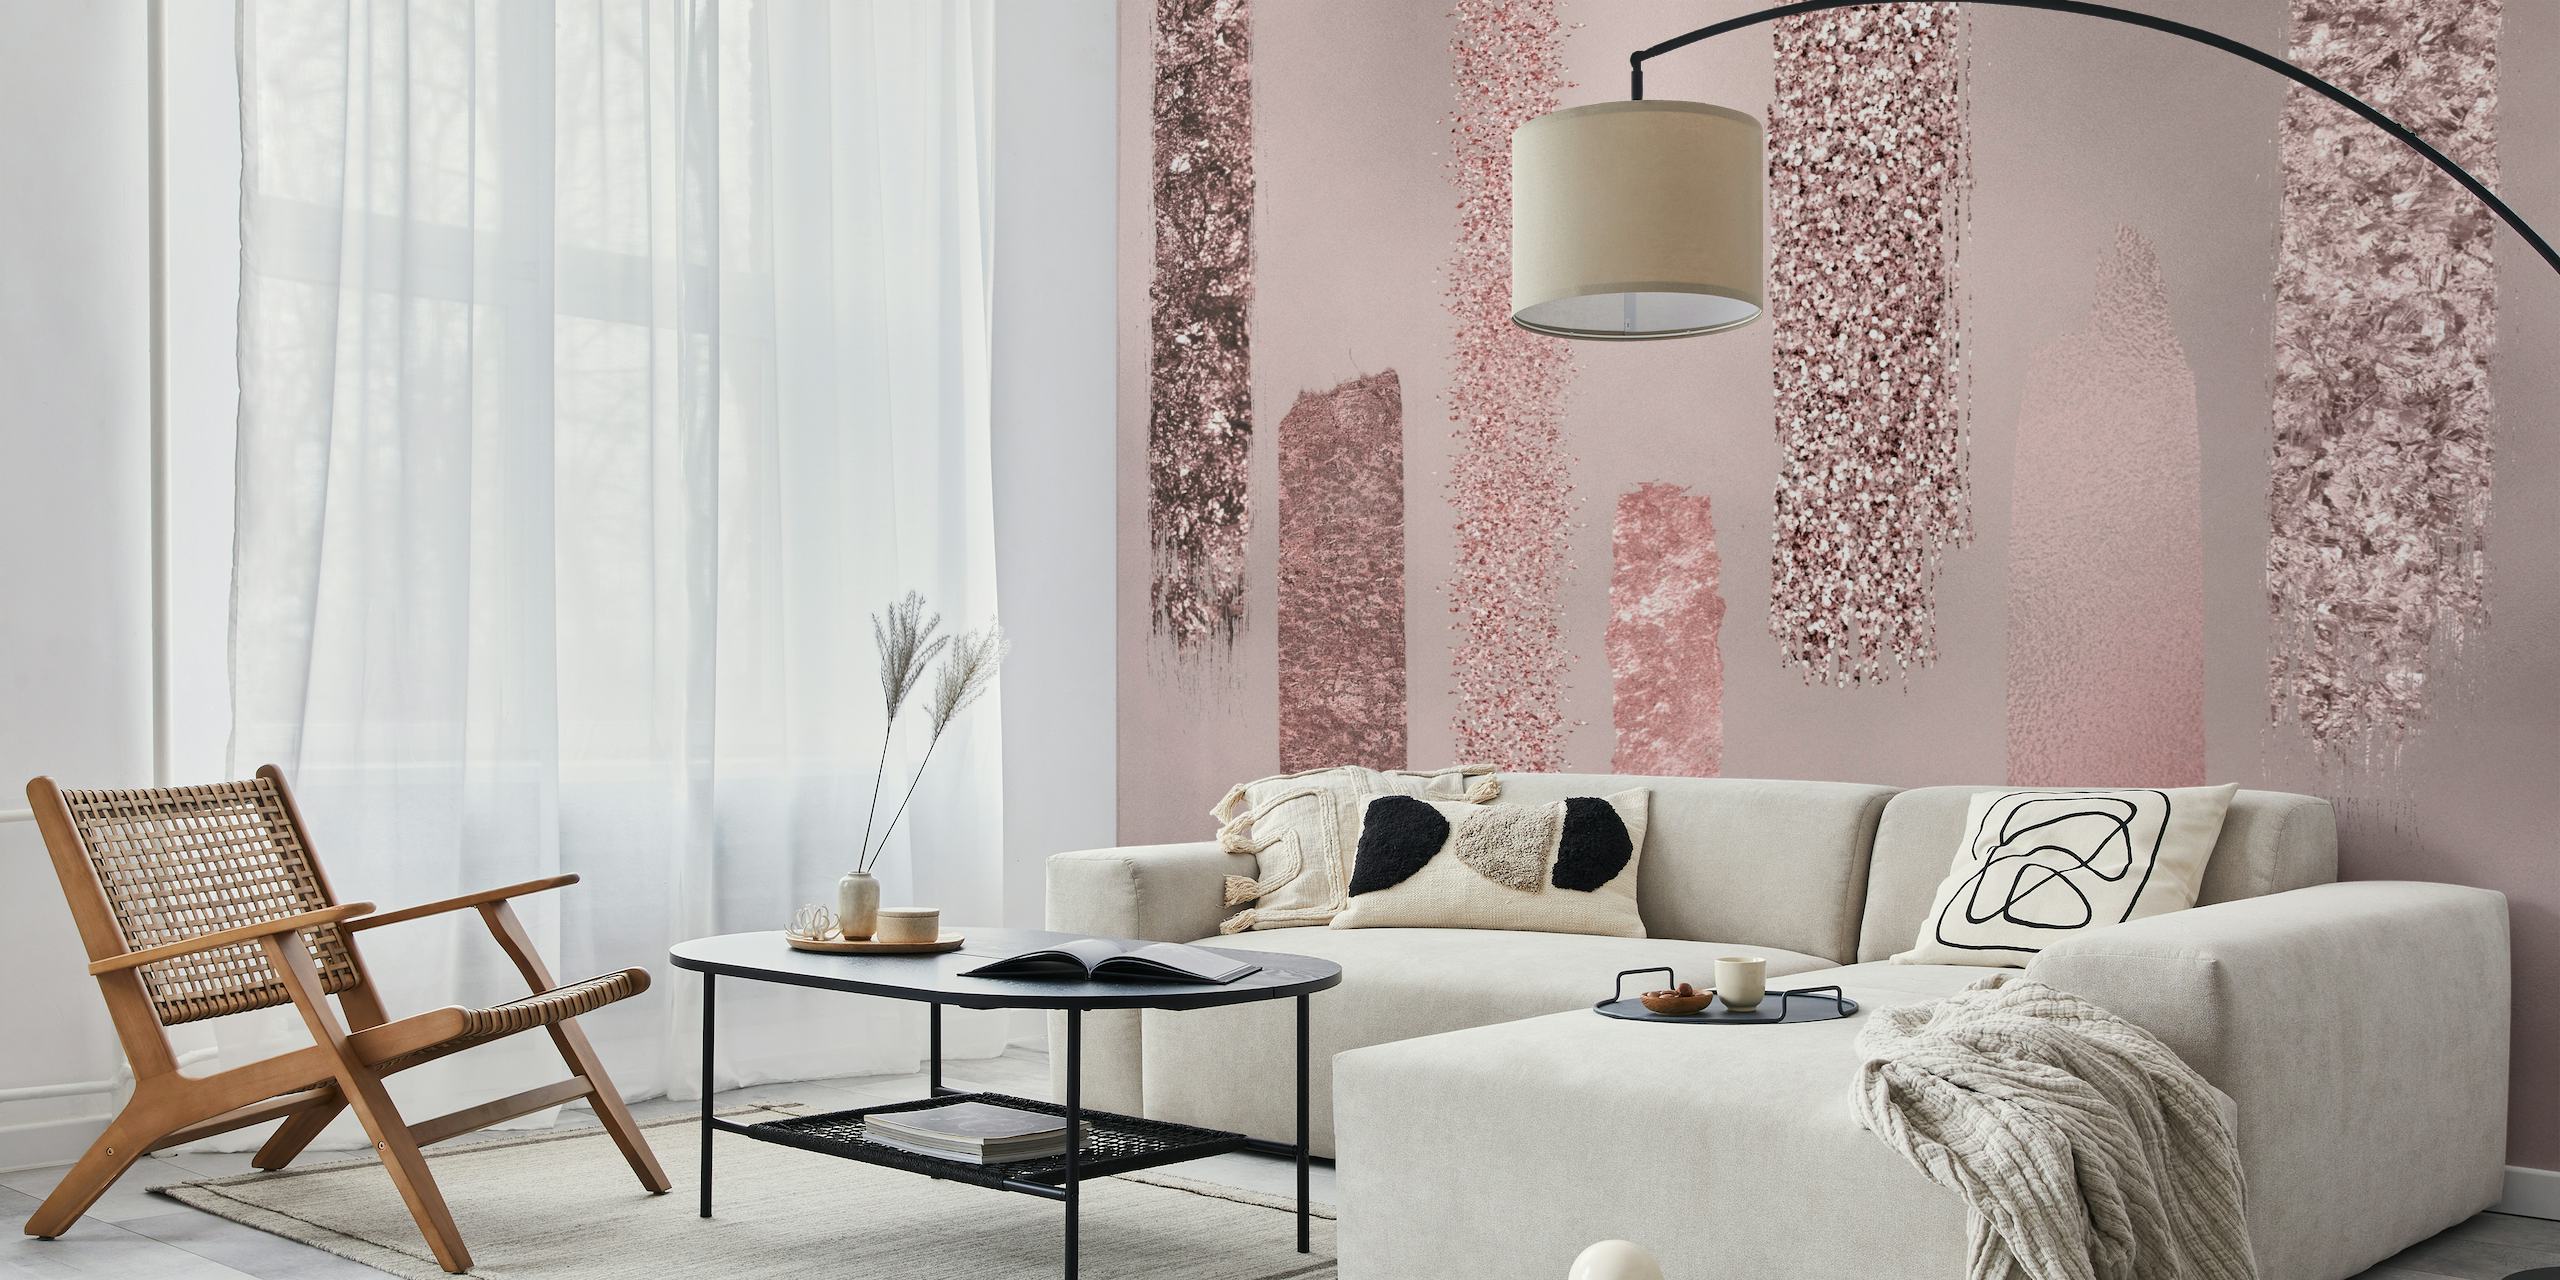 Elegant rose gold striped wall mural with varying shades and textures